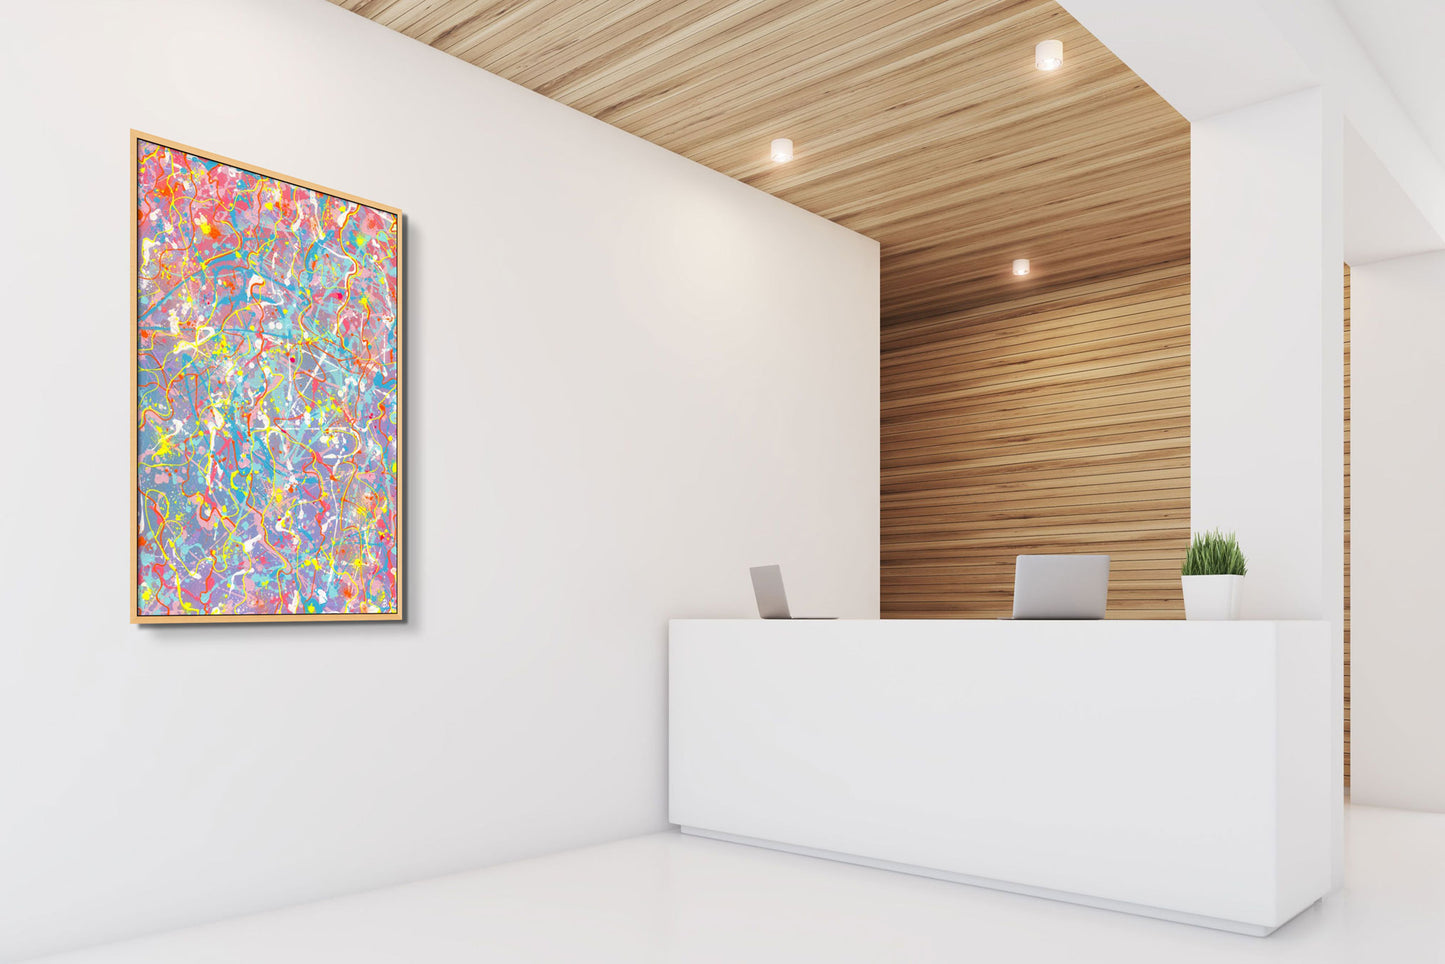 'Truth' Large, Canvas Fine Art print, framed in oak seen hanging in modern boutique hotel lobby. After the original abstract painting by Bridget Bradley